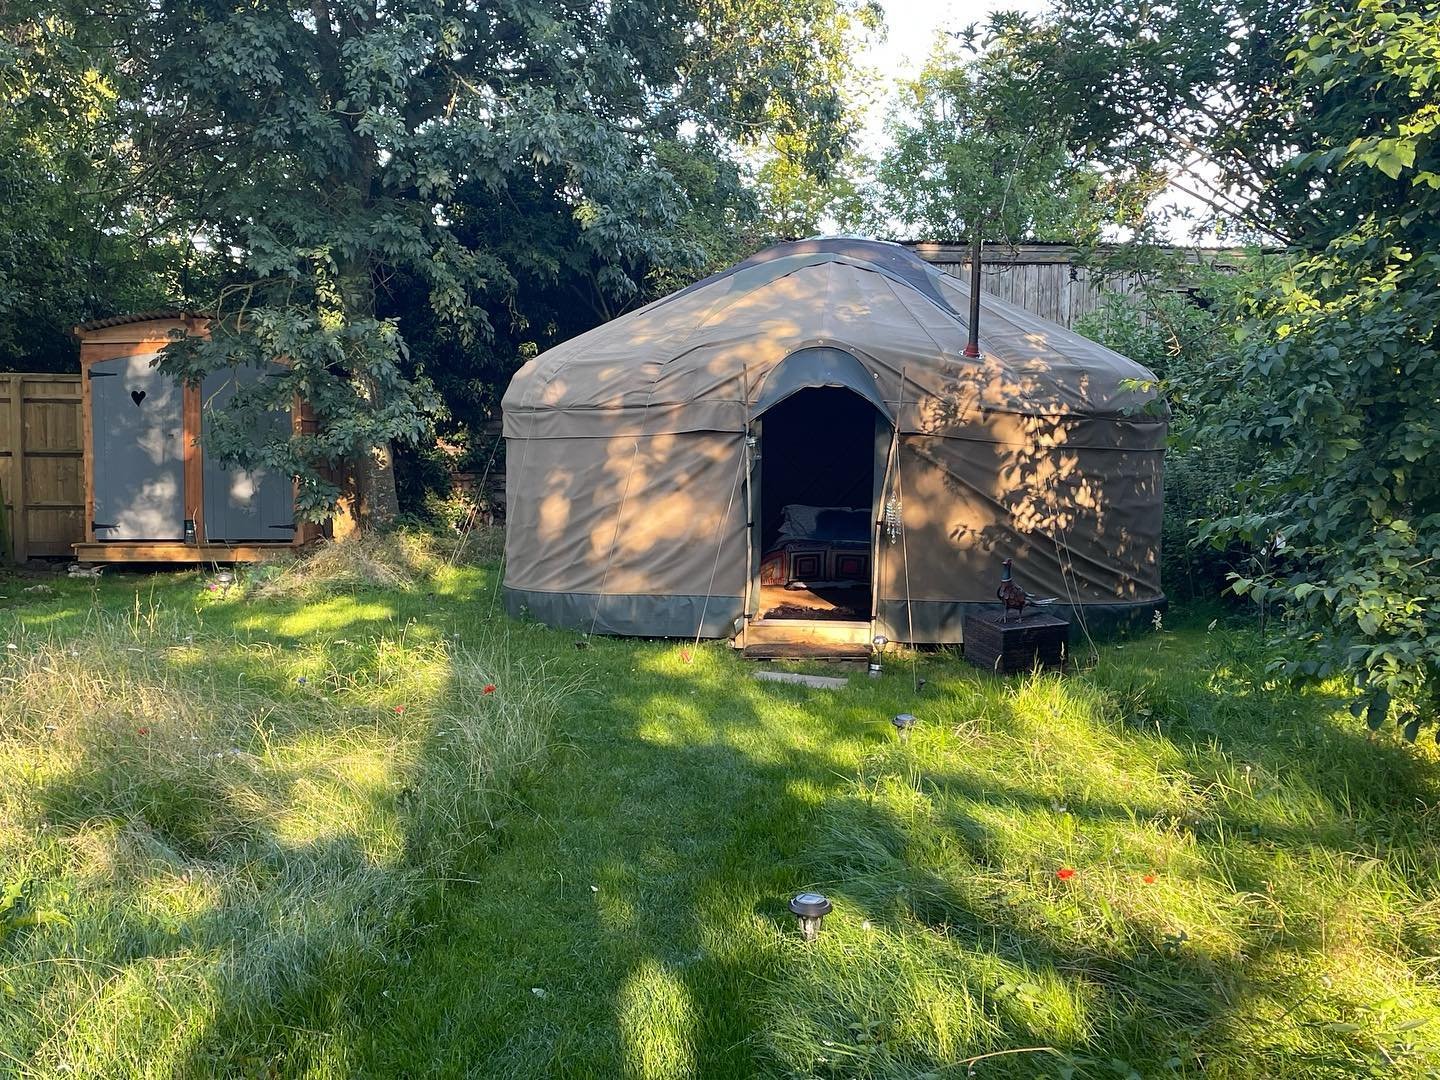 For everyone interested in the Glamping and Camping market trends we are now livestreaming here from 7pm: https://moderncampground.com/mc-fireside-chats/